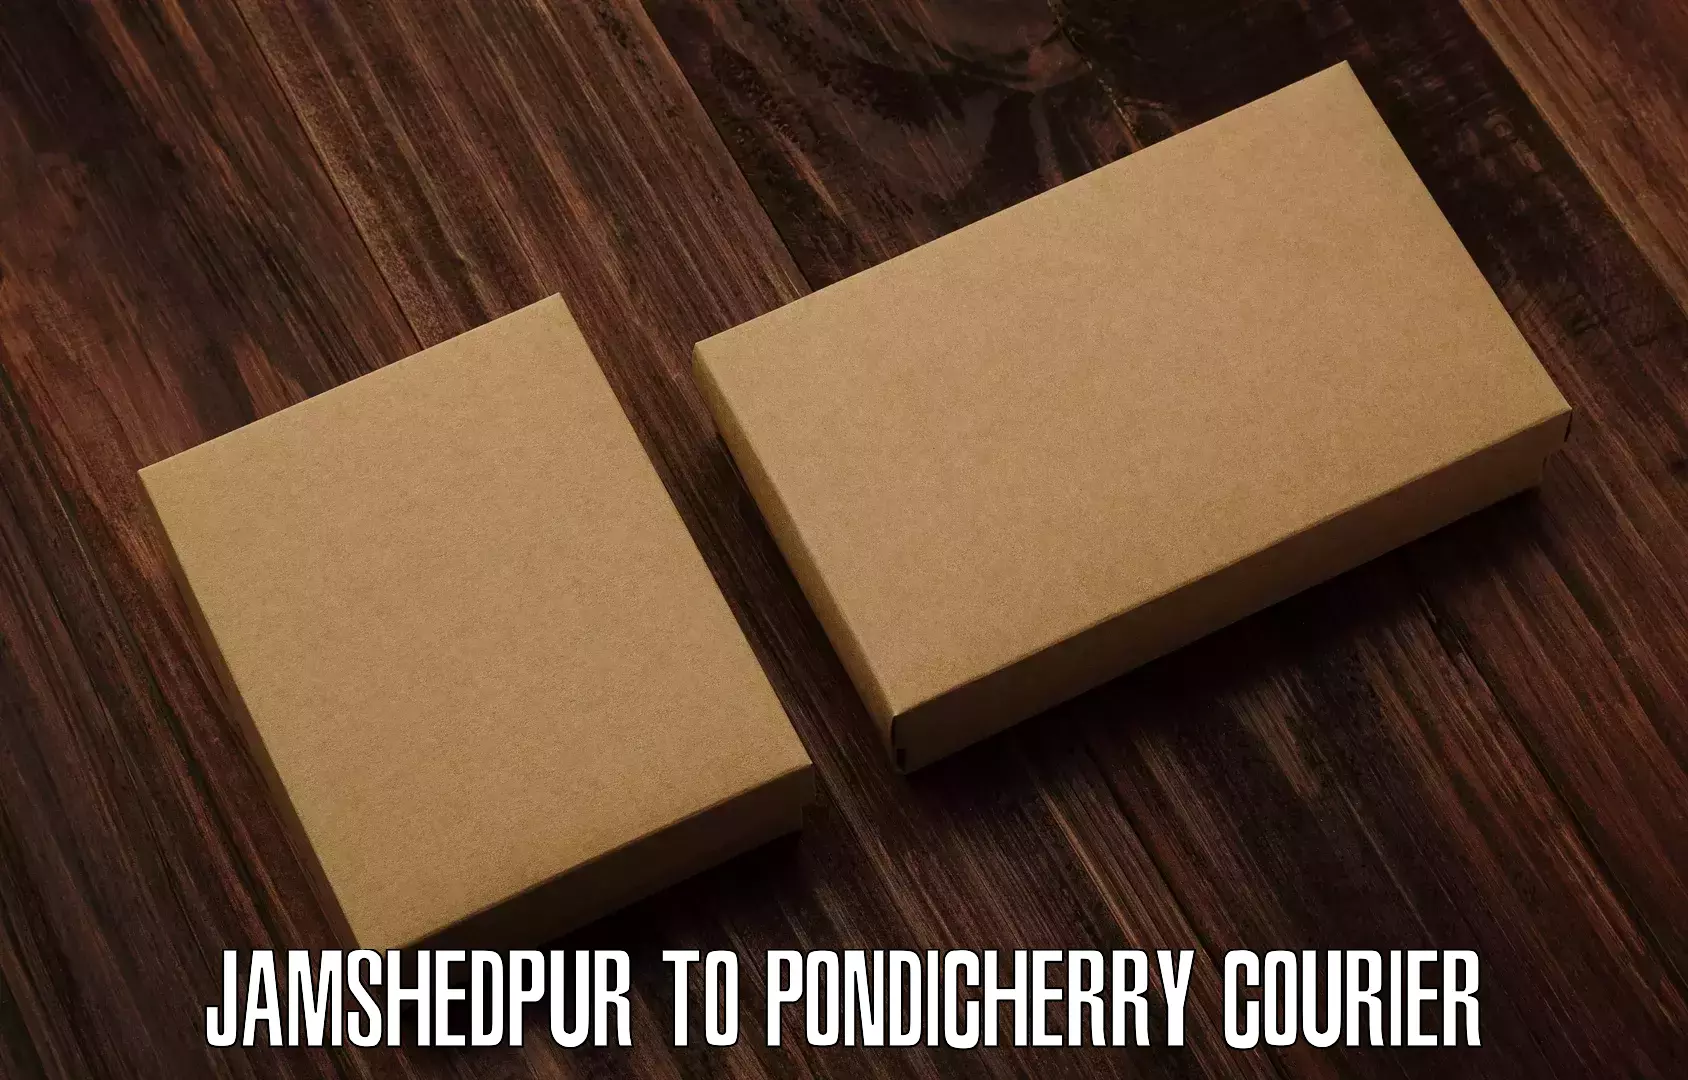 Full-service courier options Jamshedpur to Pondicherry University